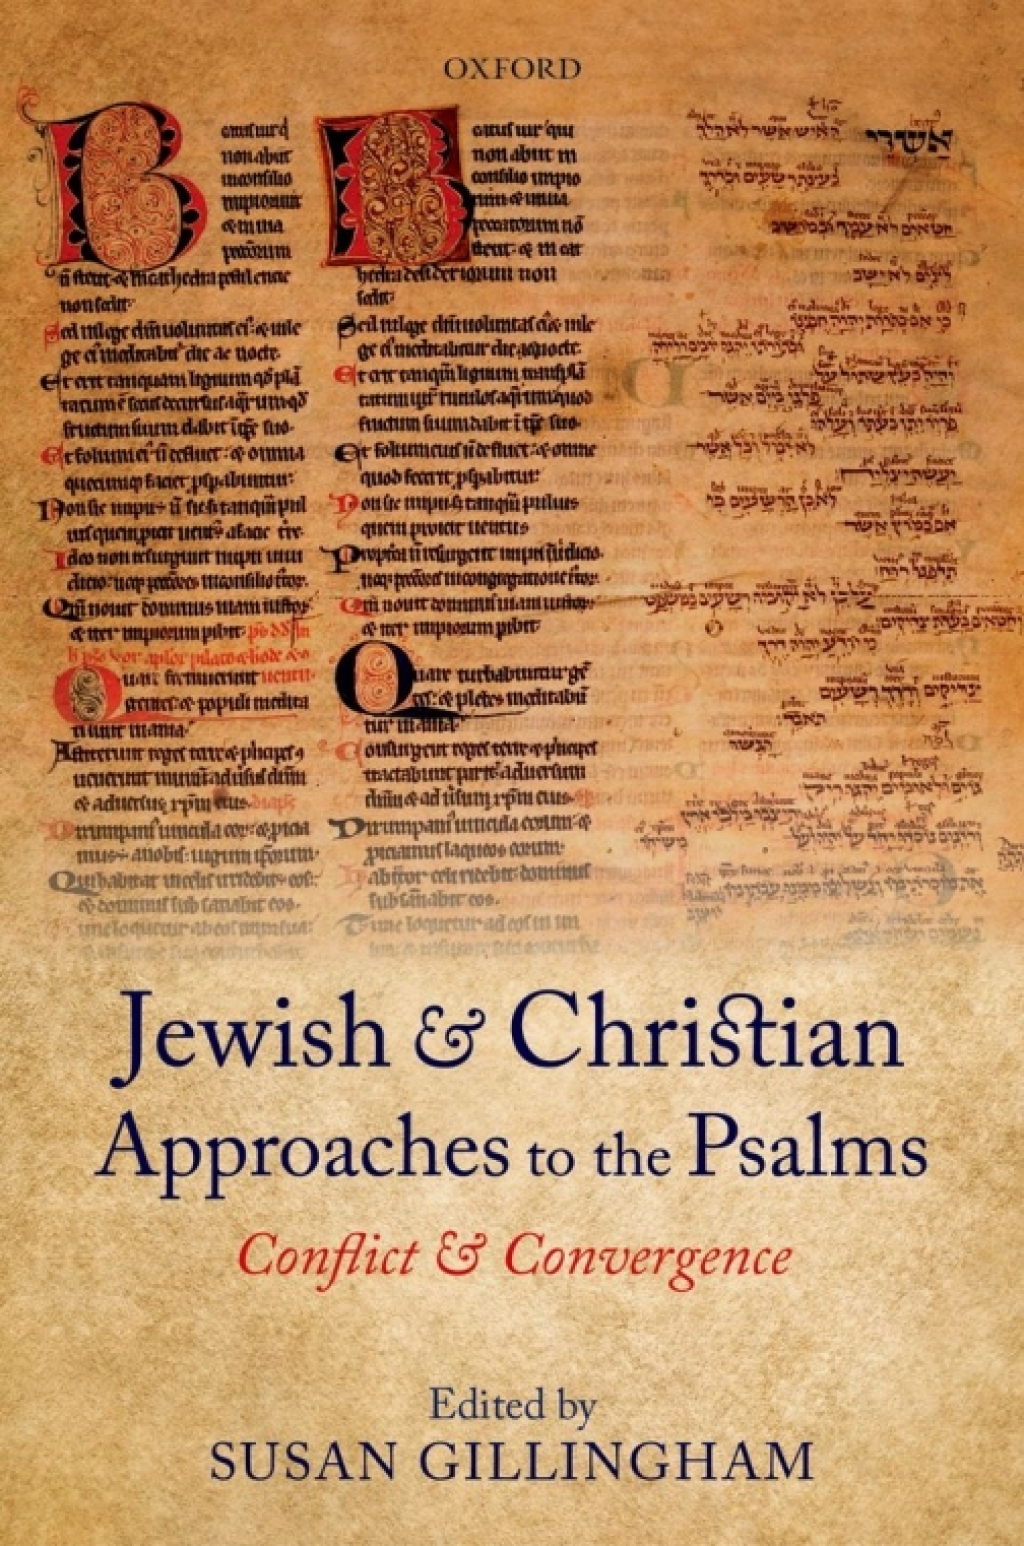 ISBN 9780199699544 product image for Jewish and Christian Approaches to the Psalms - 1st Edition (eBook Rental) | upcitemdb.com